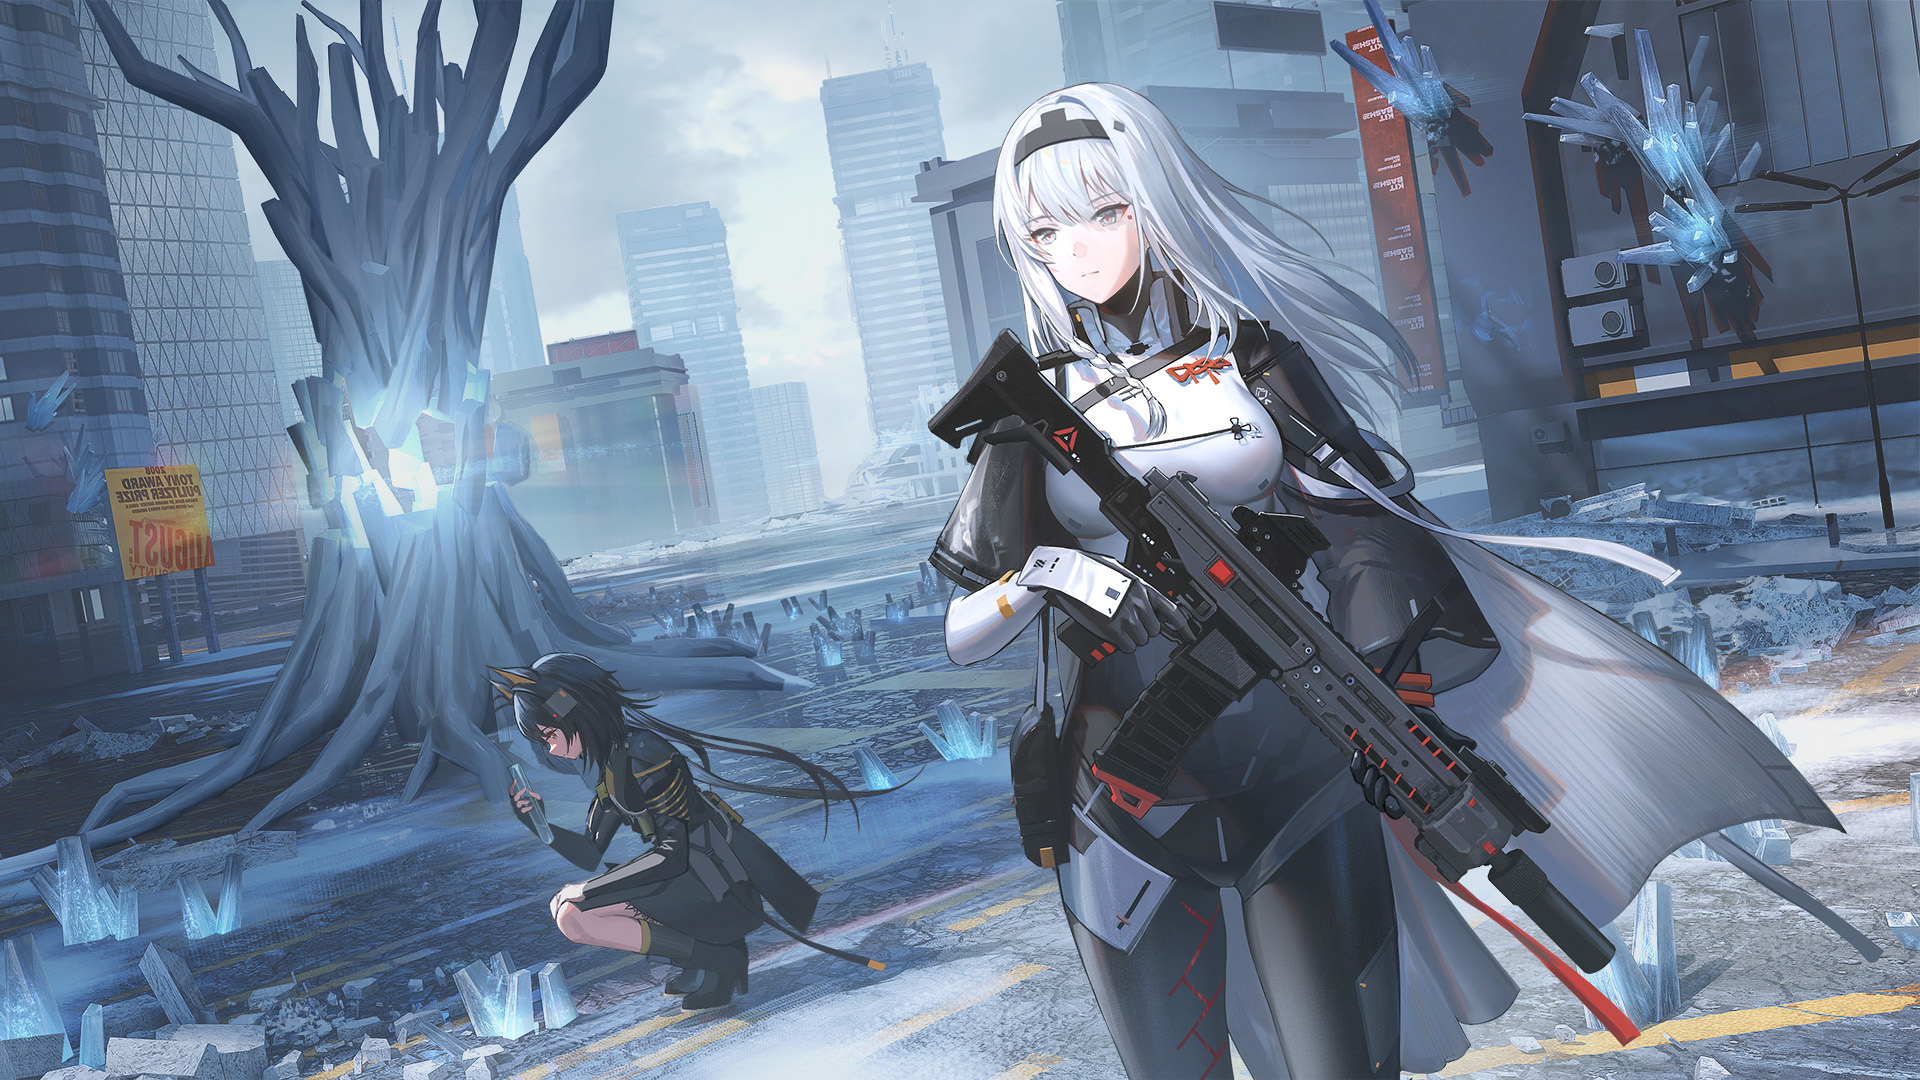 Anime 1920x1080 anime anime girls standing city building sky clouds video game art long hair video games squatting uniform looking away Snowbreak: Containment Zone